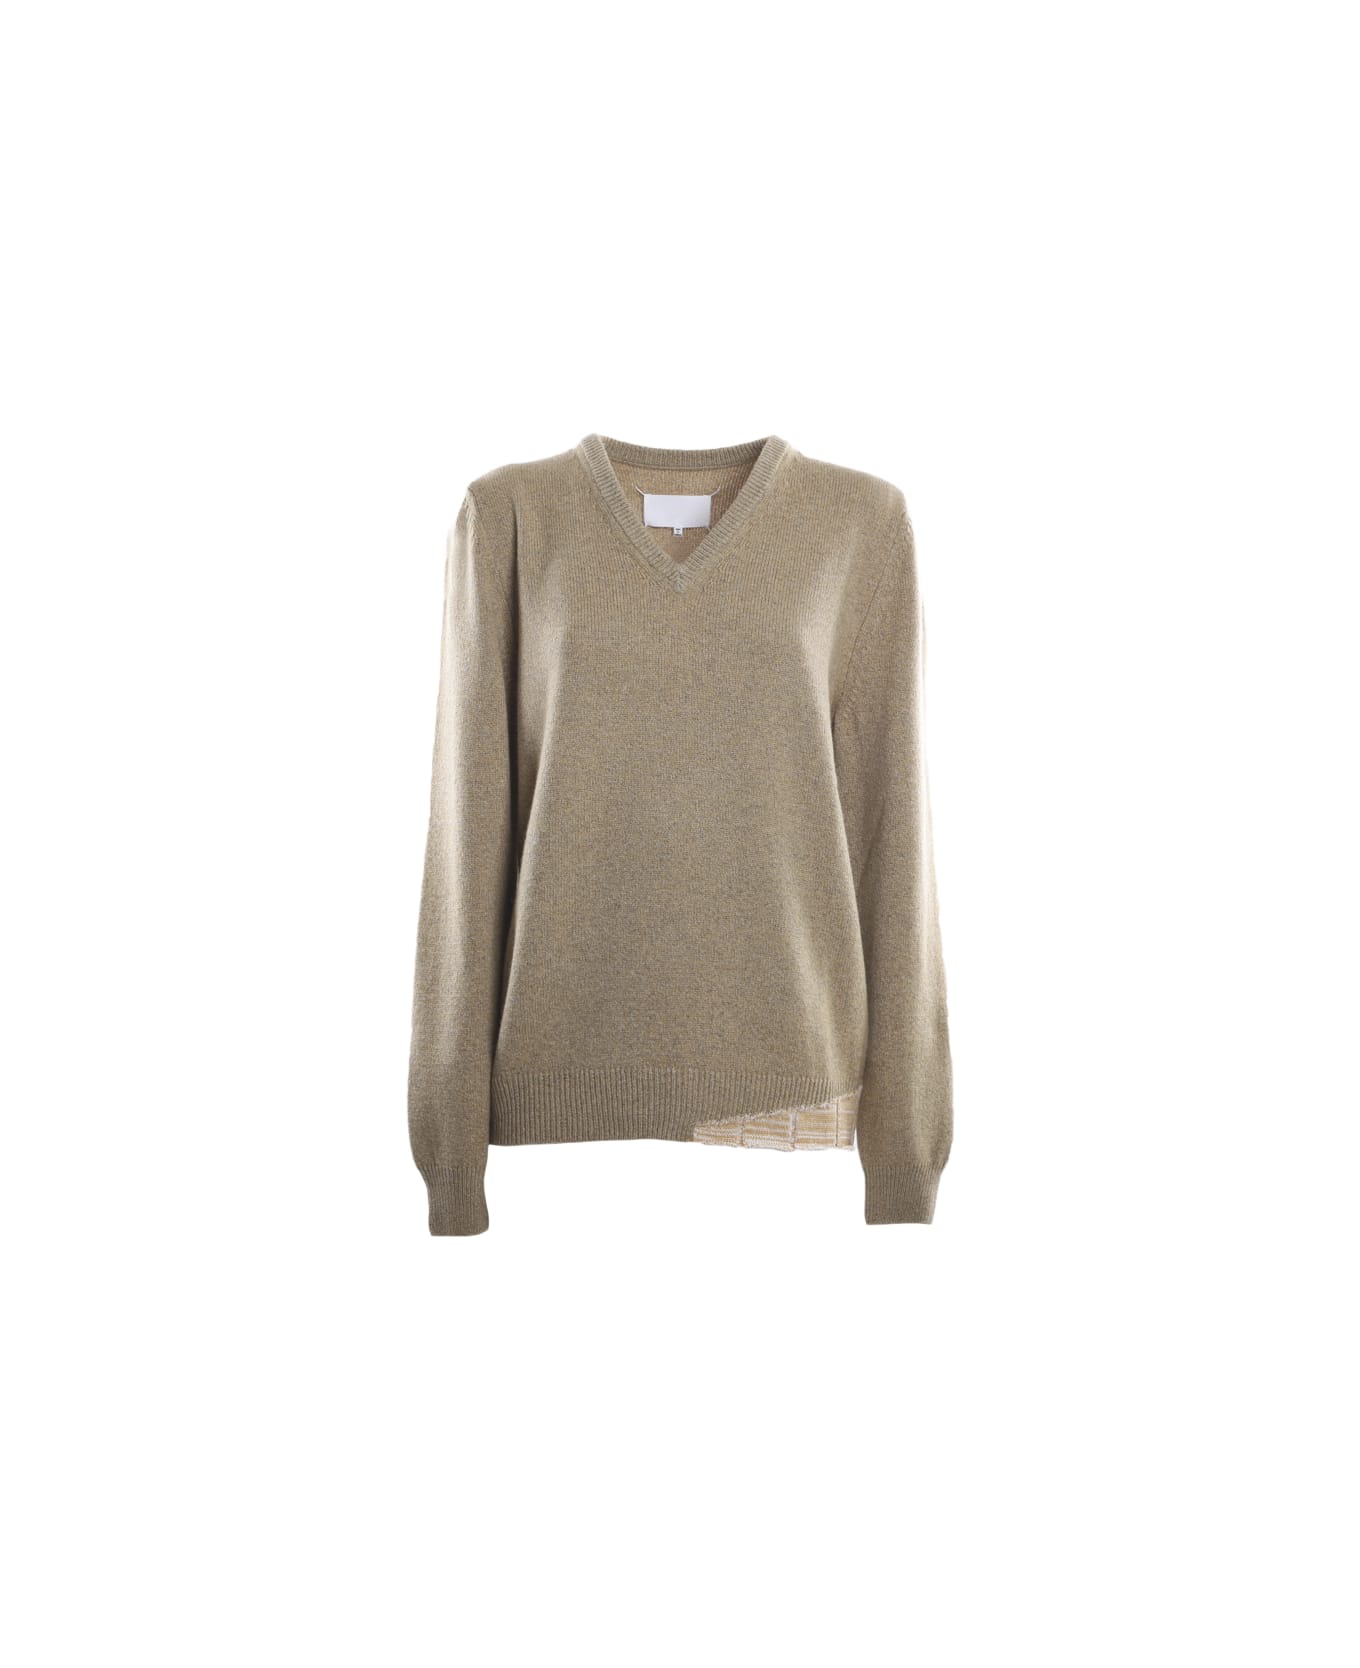 Maison Margiela Wool And Cashmere Sweater With Contrasting Insert - Beige